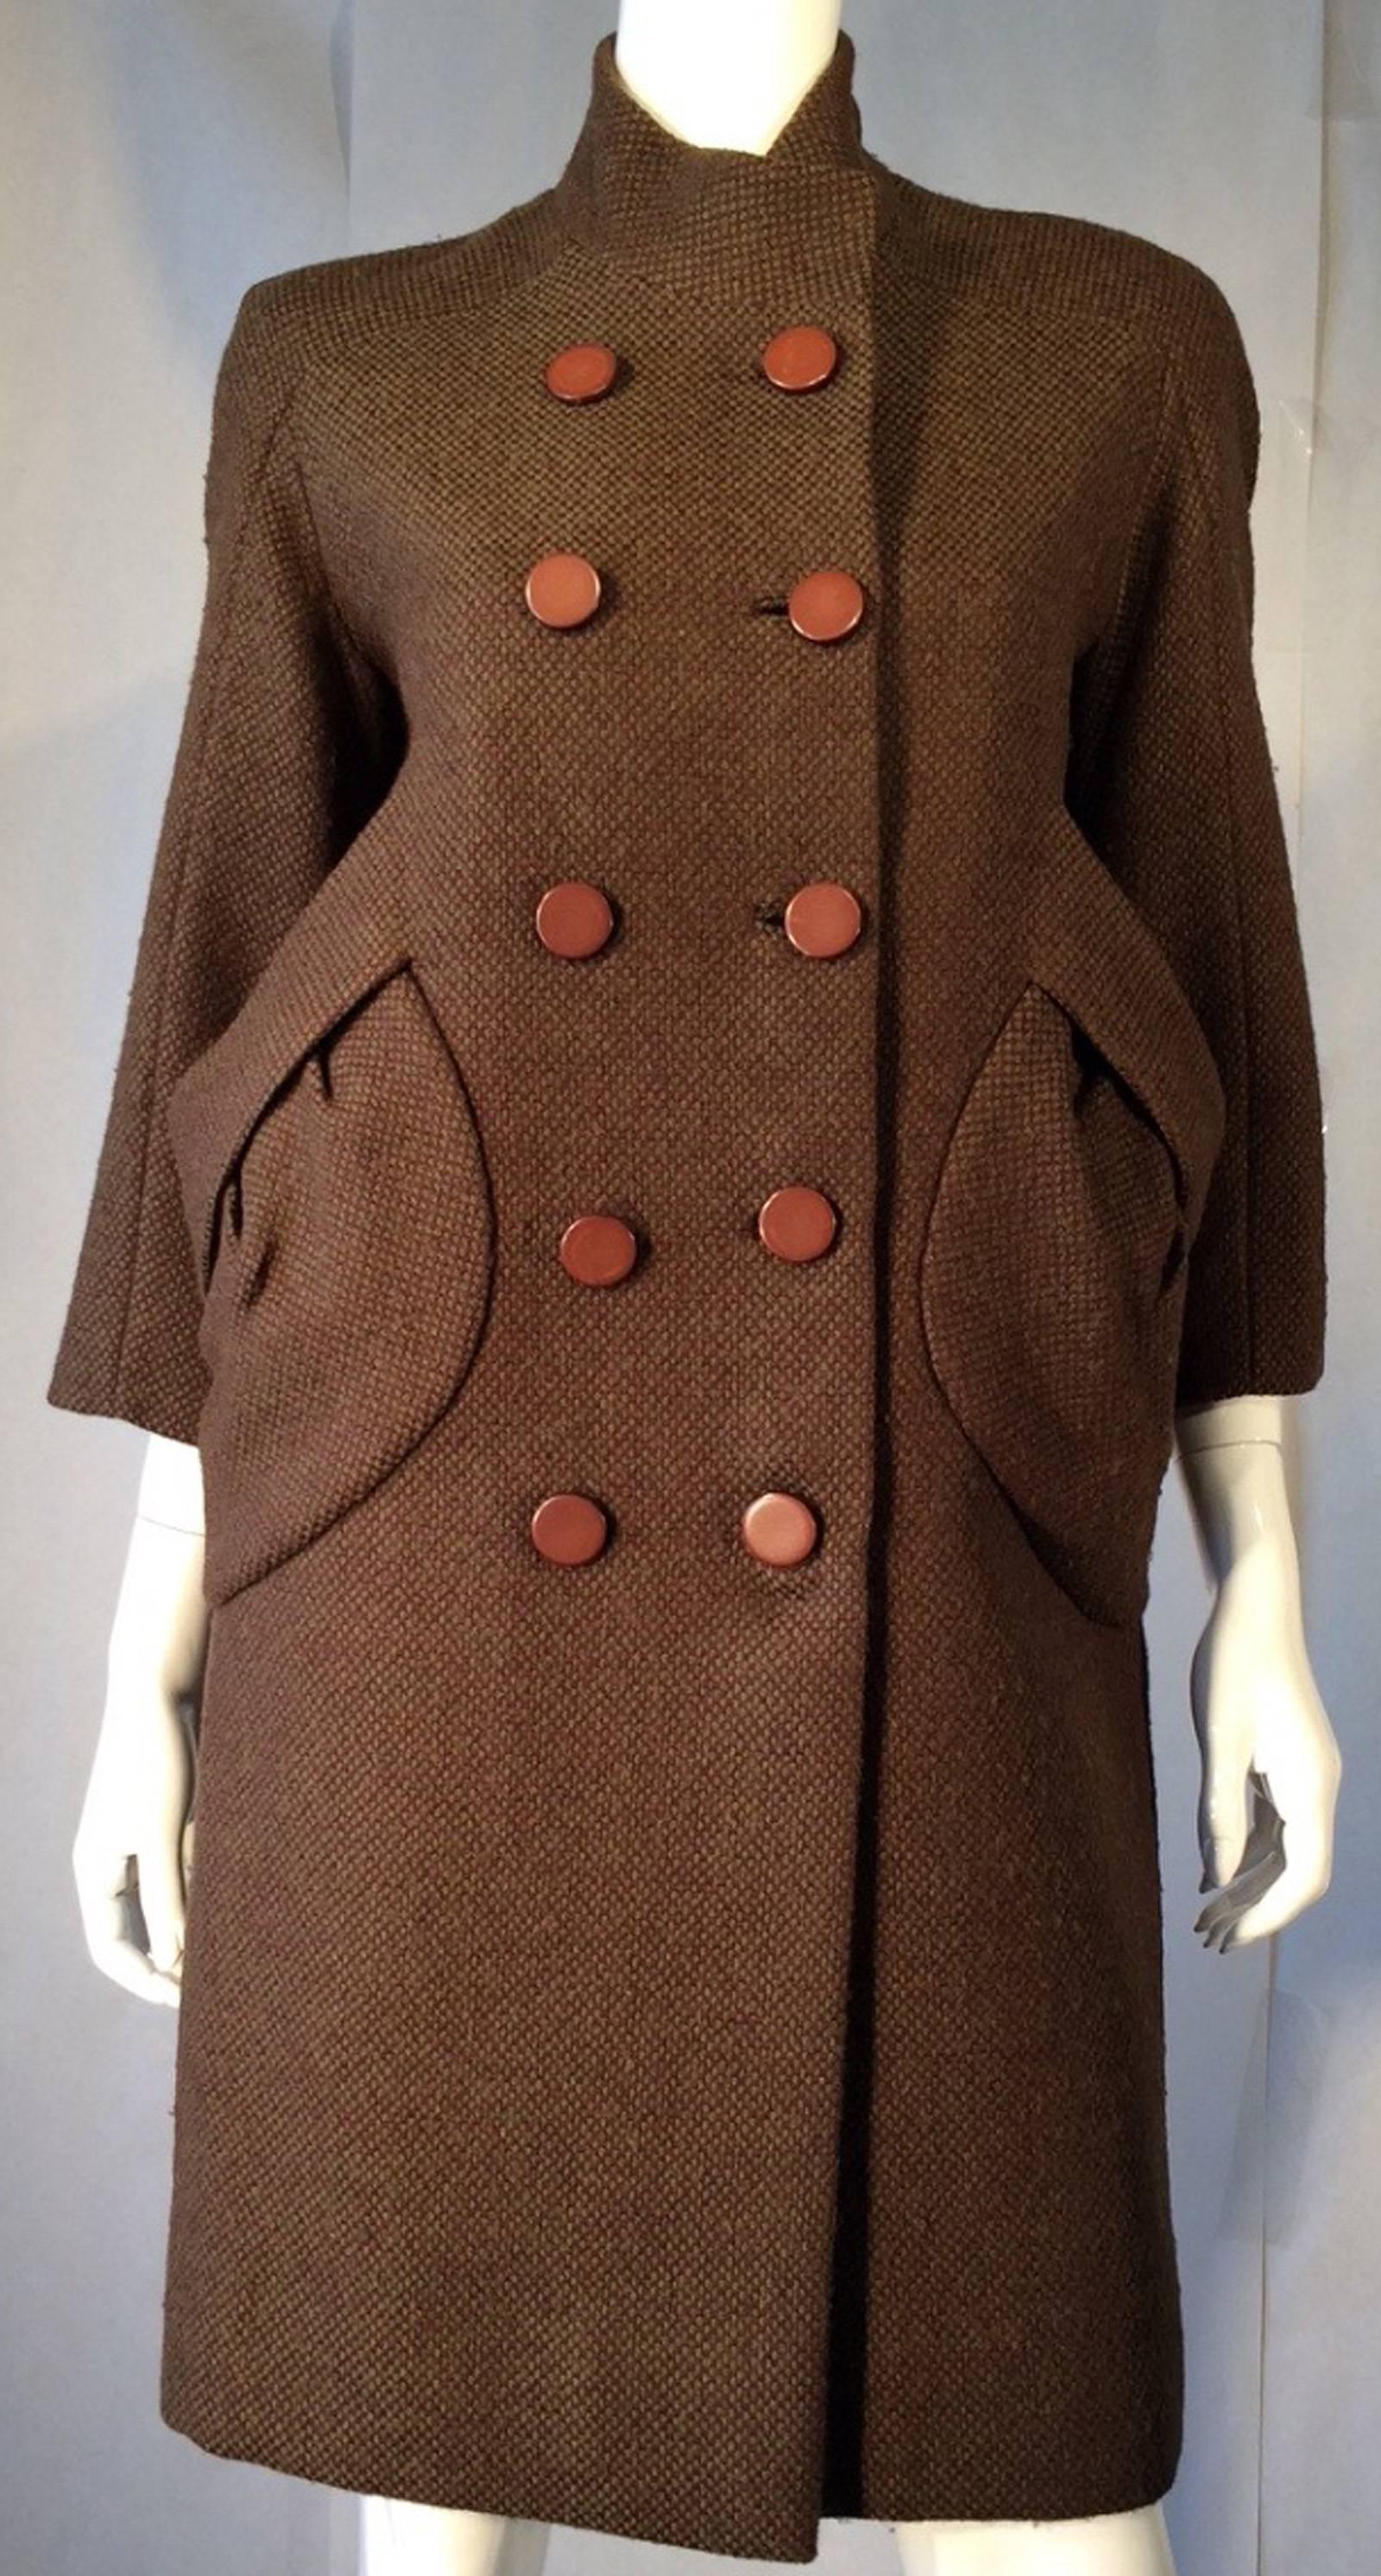 A fine vintage Jacques Heim sculpted coat. Fine olive woven wool item features a pair of unusual sculpted side pockets and double breasted button front. Item fully silk lined with precision seams. Pristine appears possibly unworn.